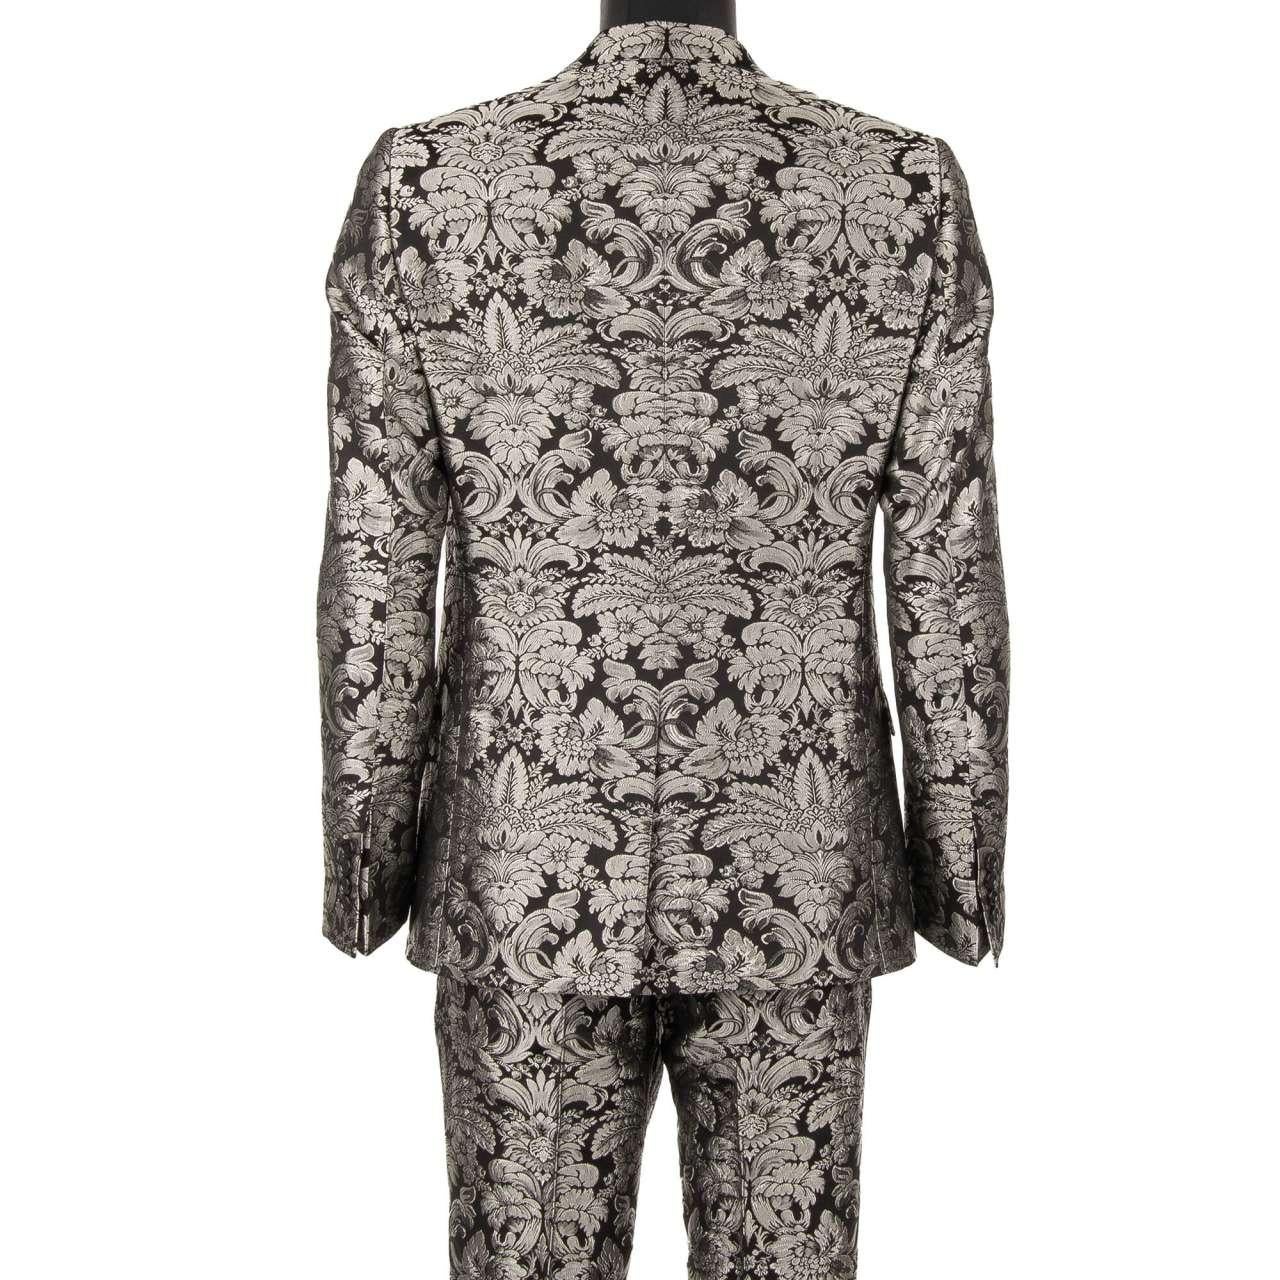 - Baroque jacquard suit with peak lapel in silver and black by DOLCE & GABBANA - MARTINI Model - RUNWAY - Dolce & Gabbana Fashion Show - New with tag - Former RRP: EUR 2,600 - MADE in ITALY - Slim Fit - Model: GK0RMT-FJ1RDQ-S8350 - Material: 40%